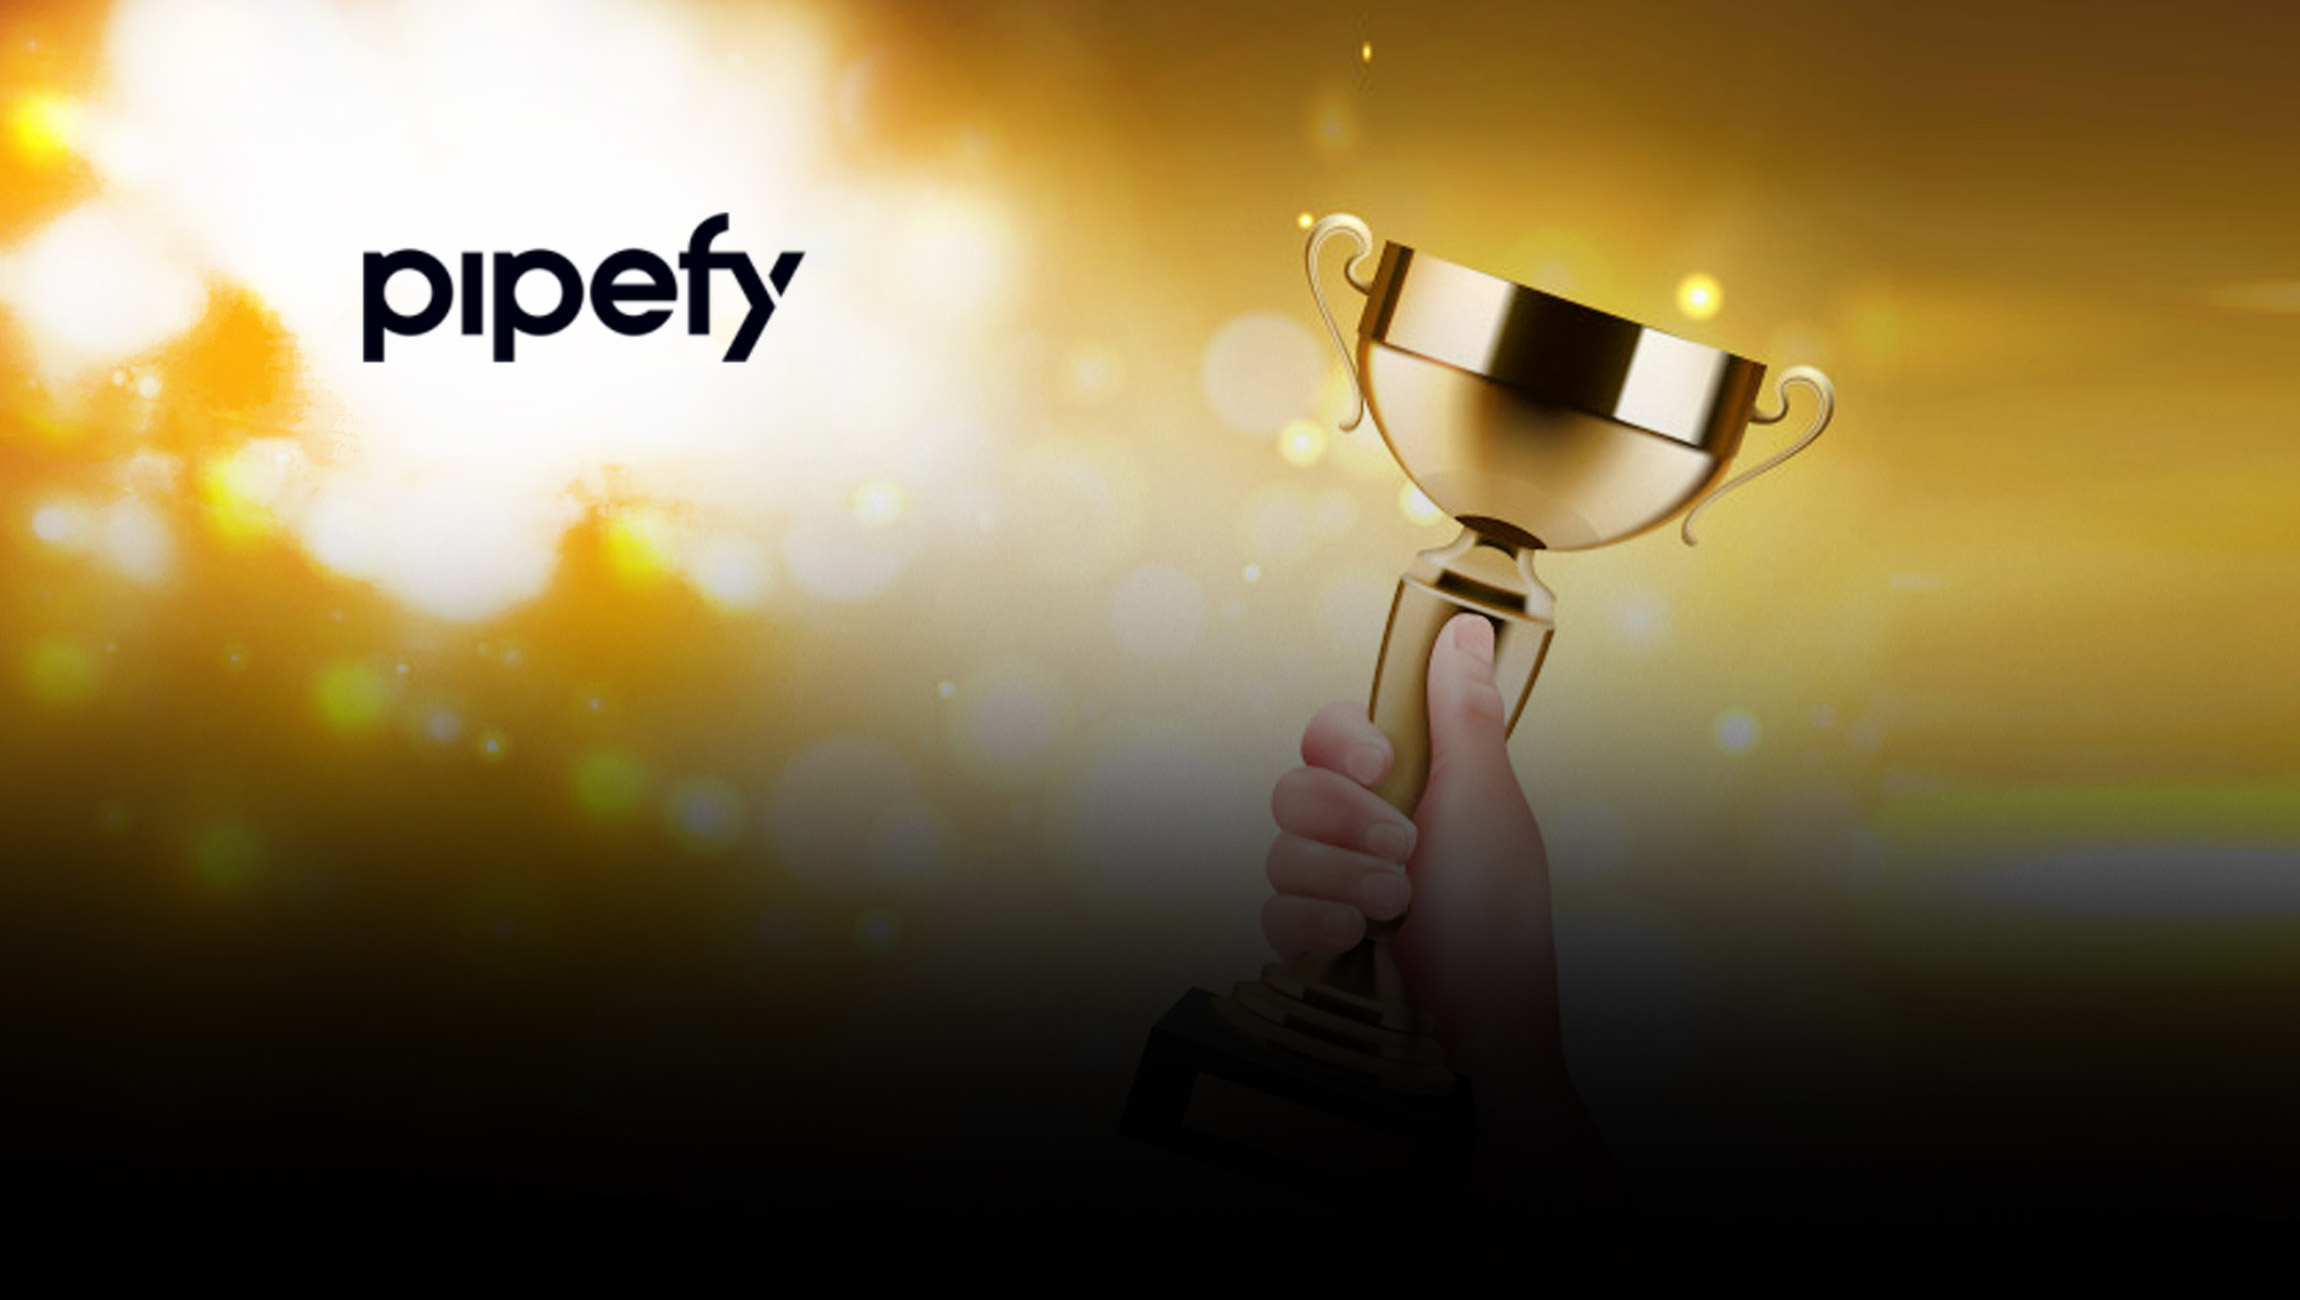 Pipefy Named Best Company for Career Growth and the company with the Best CEO for Diversity in 2022 Comparably Awards